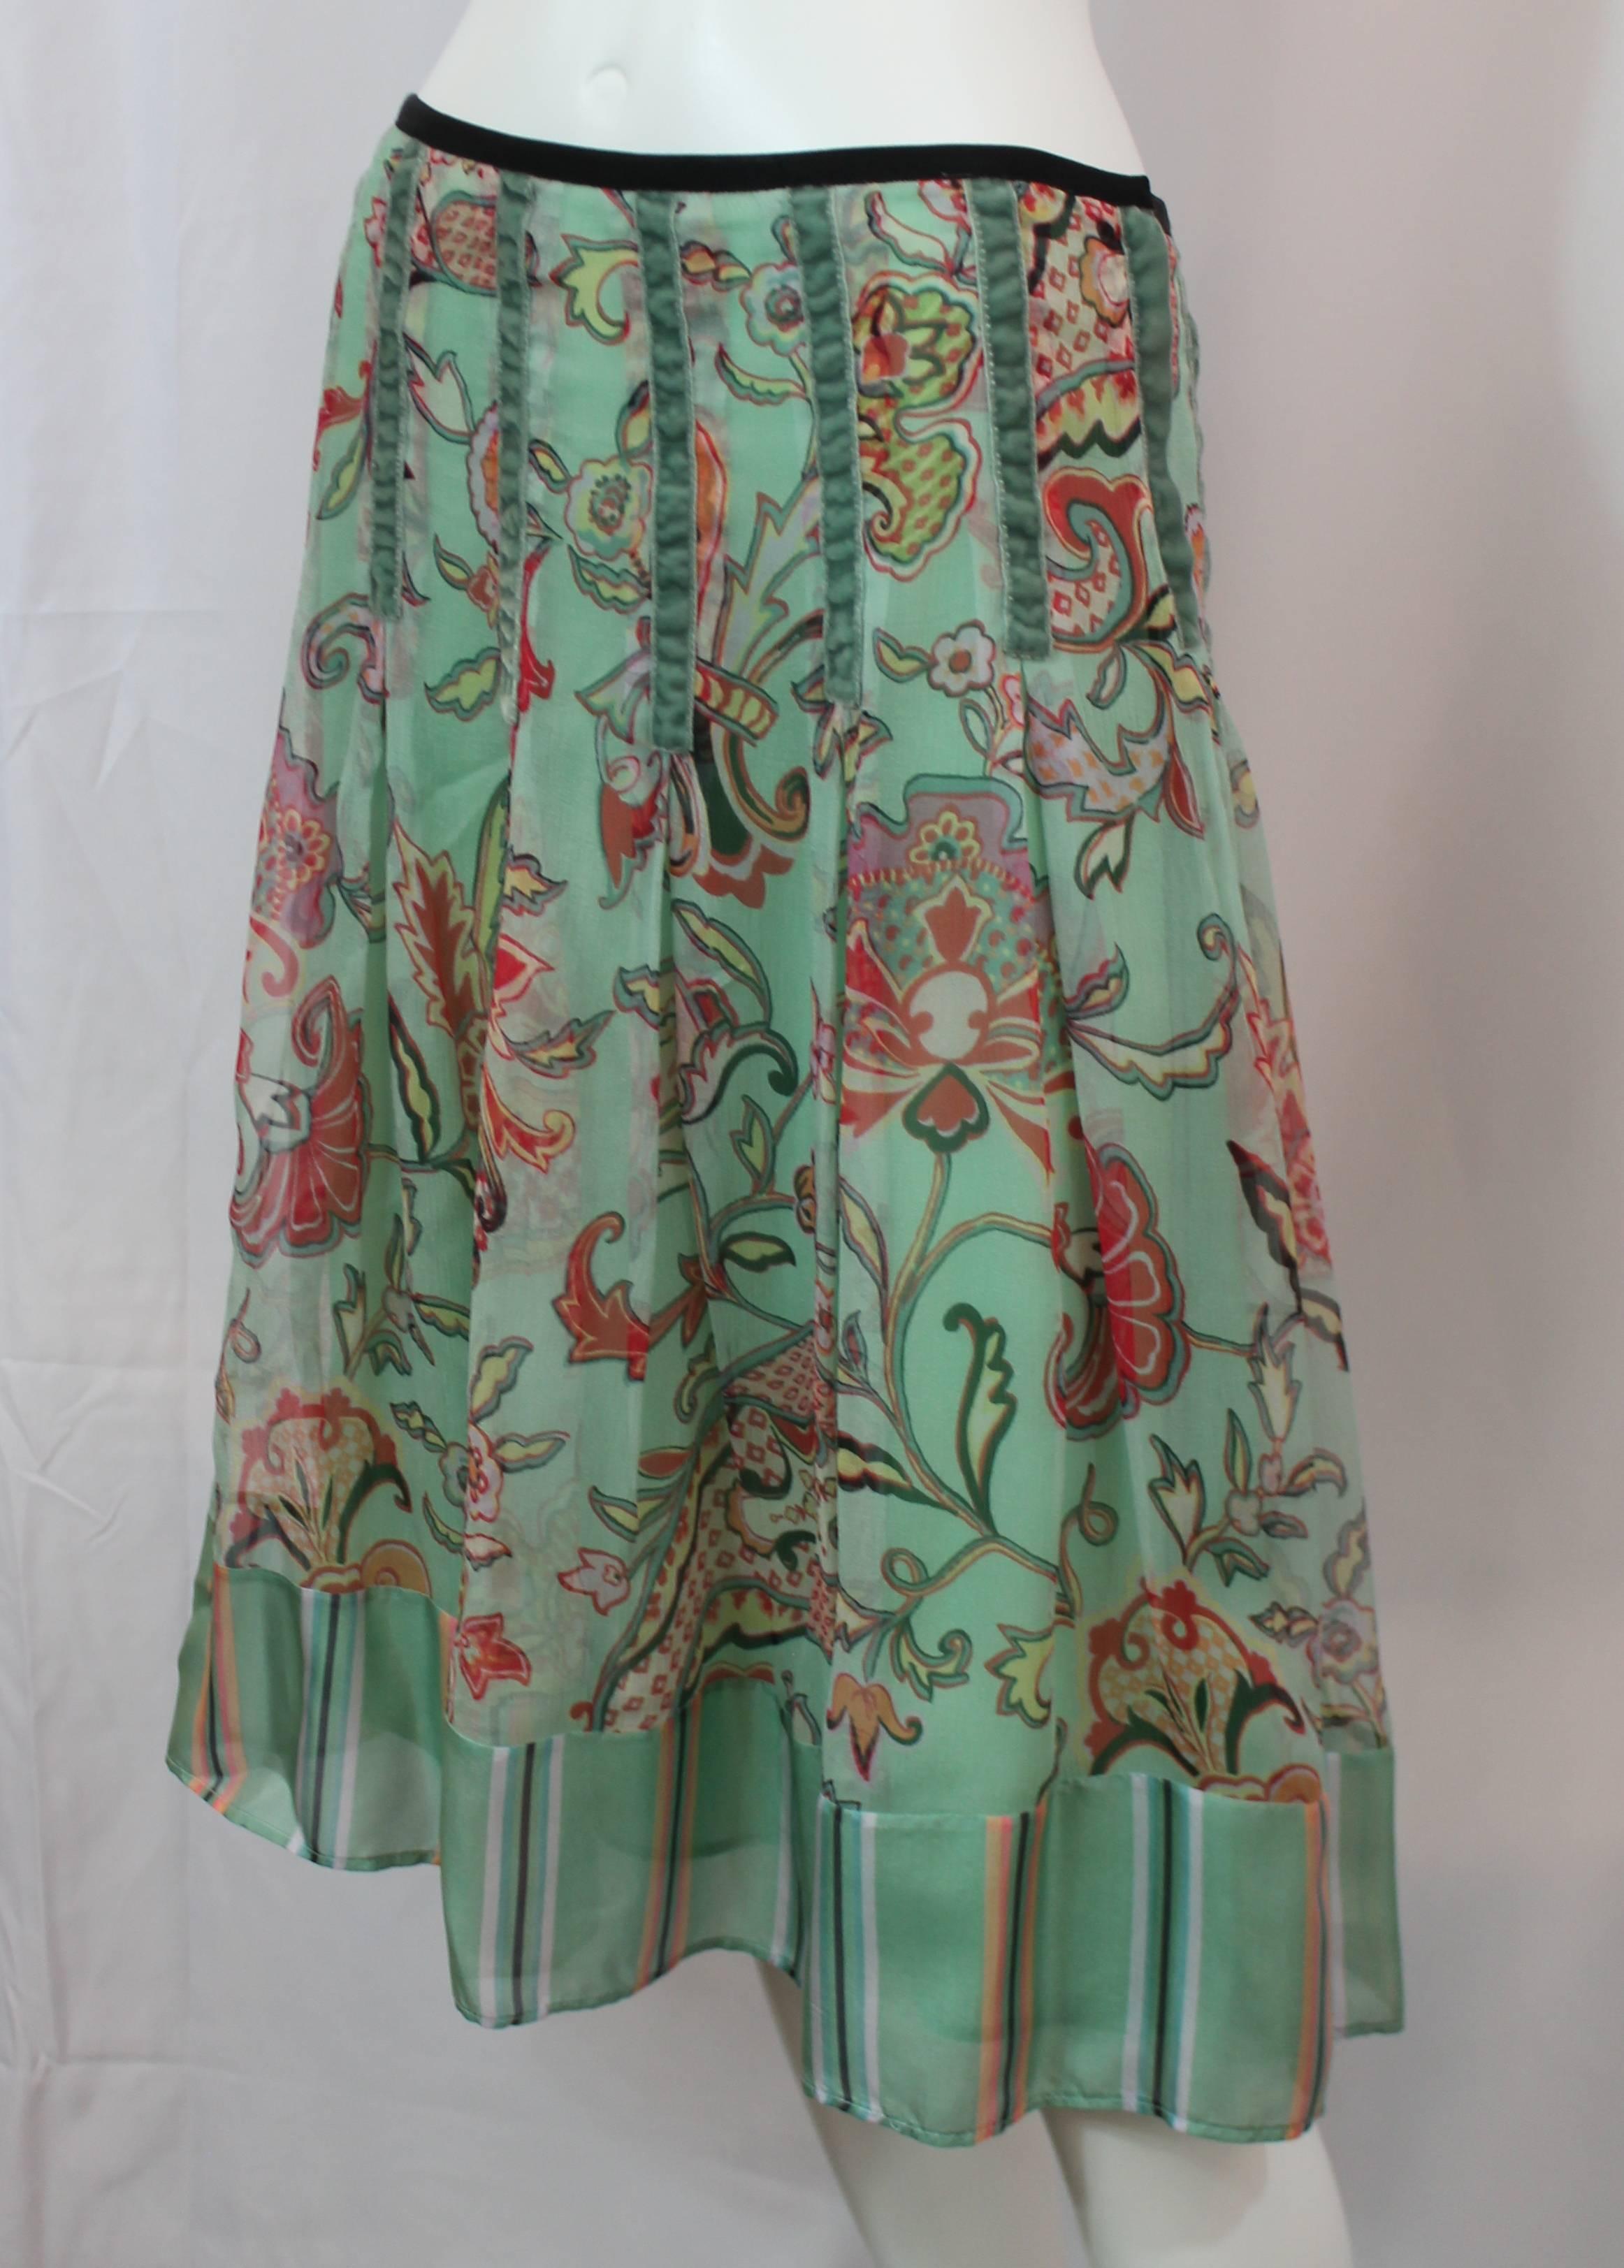 Etro Seafoam Silk Chiffon Paisley Print Skirt with Striped Silk Bottom - 42. This seafoam skirt has a multi-colored paisley print and a striped silk bottom. There is velvet detailing all along the middle and a black ribbon along the waist. There is